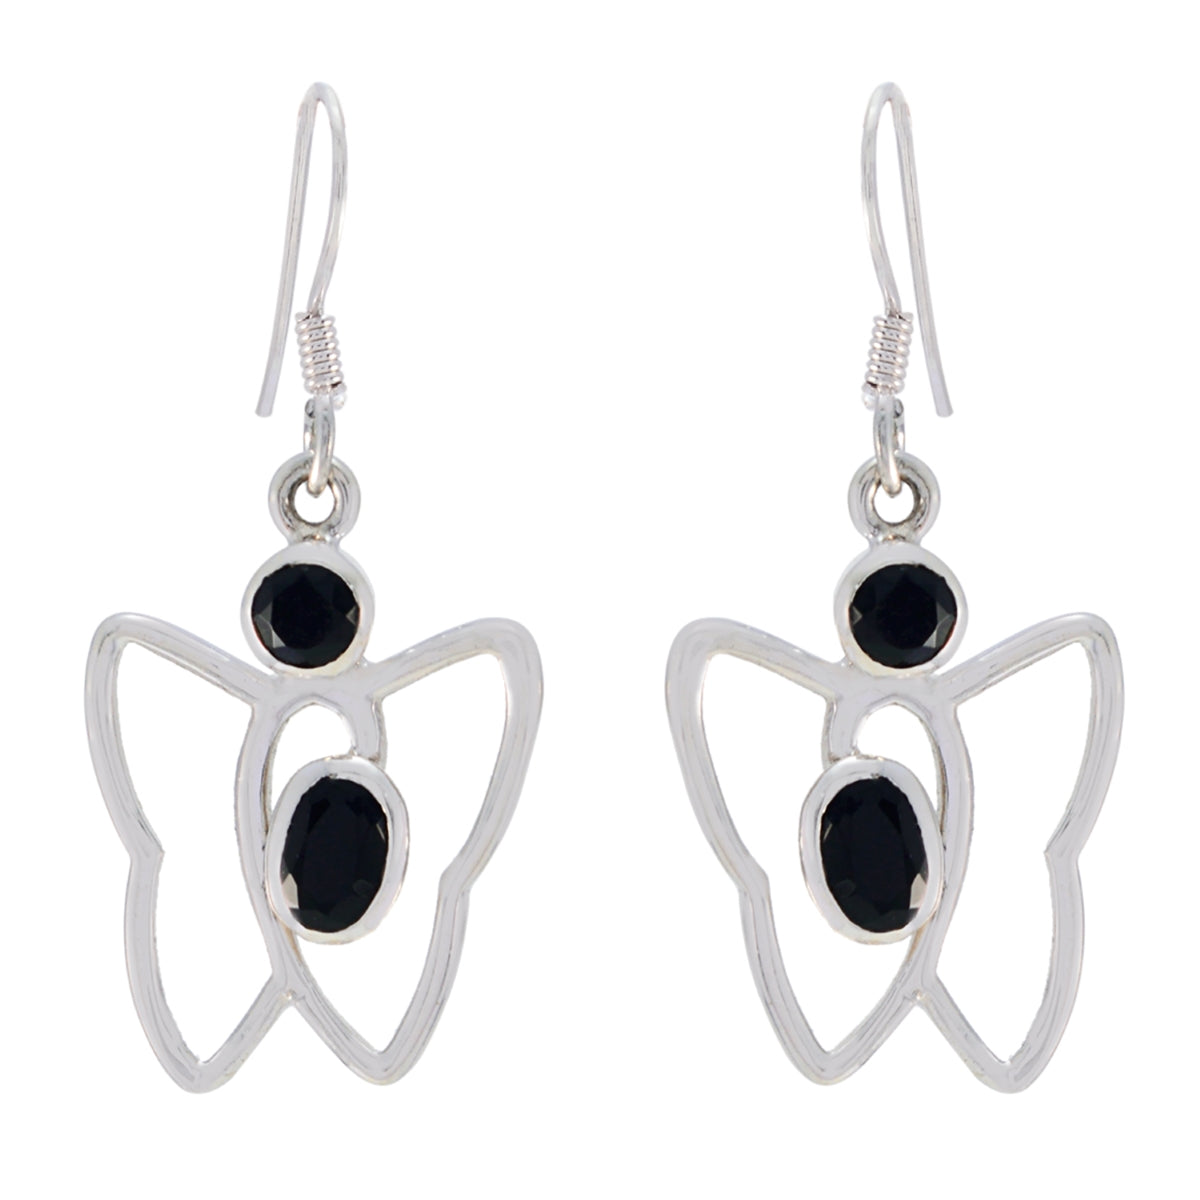 Riyo Natural Gemstone multi shape Faceted Black Onyx Silver Earrings gift for independence day